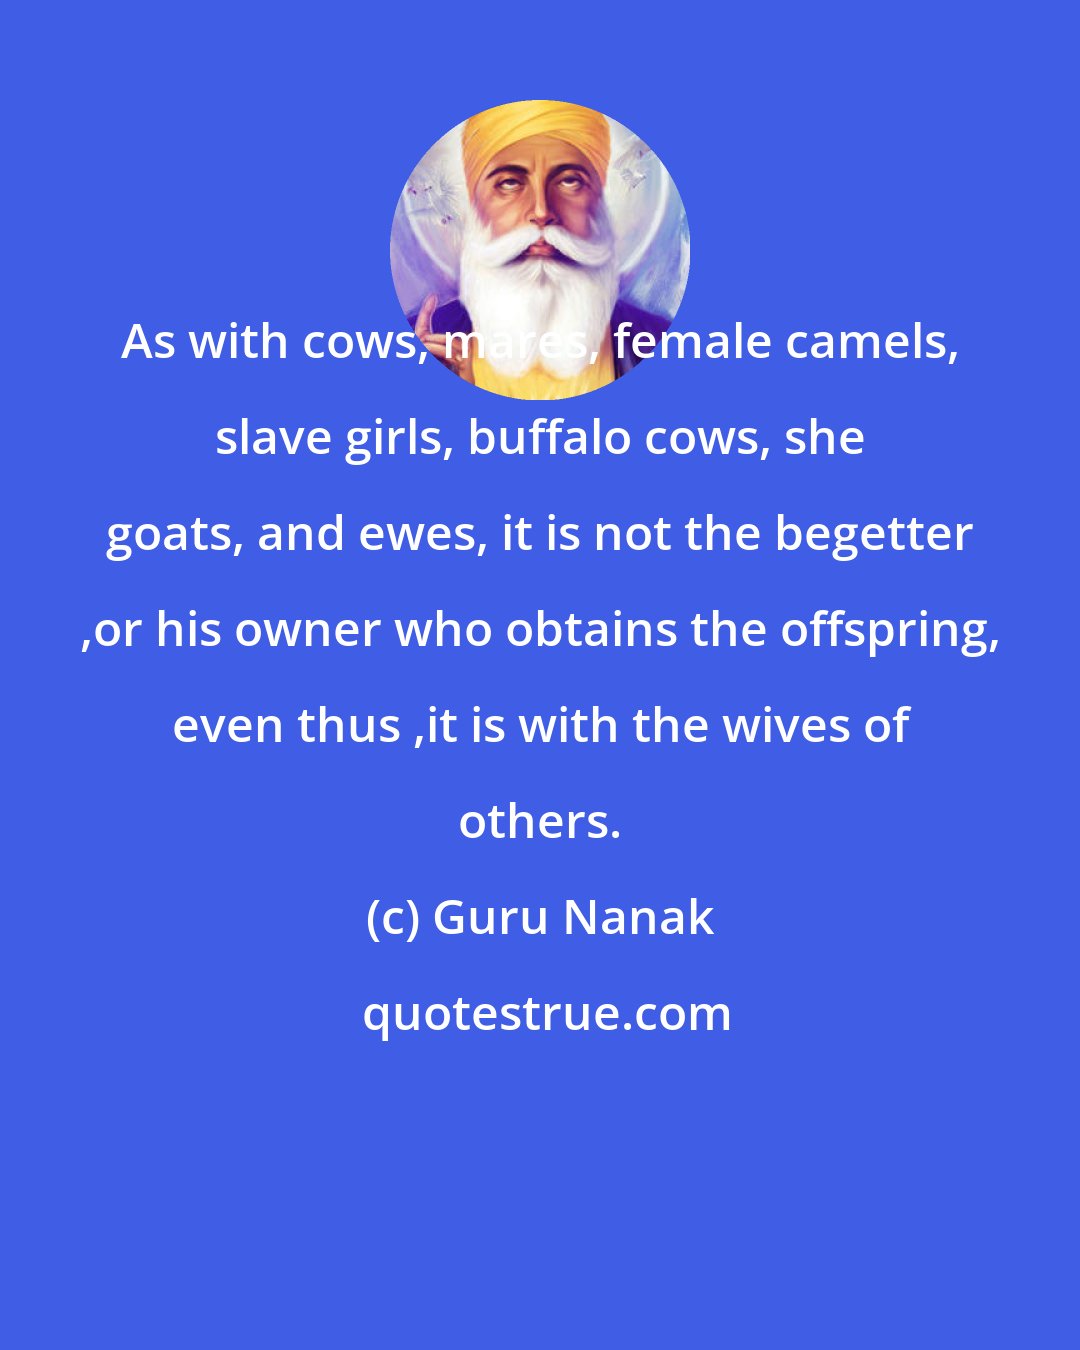 Guru Nanak: As with cows, mares, female camels, slave girls, buffalo cows, she goats, and ewes, it is not the begetter ,or his owner who obtains the offspring, even thus ,it is with the wives of others.